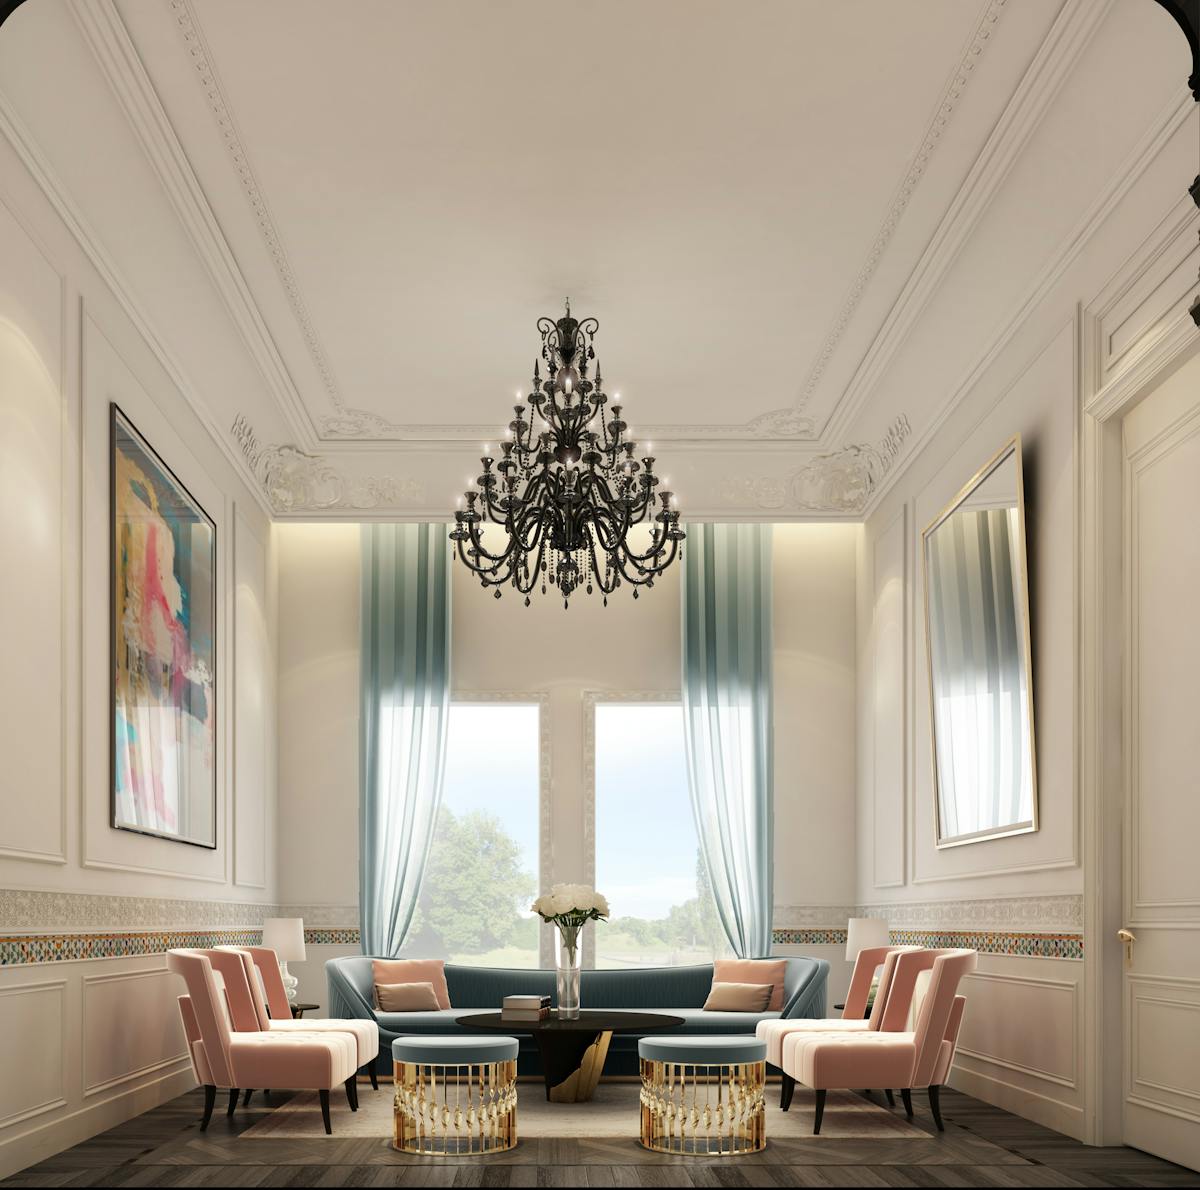 Modern Elegance Interior Design: Timeless Style With A Touch Of Class